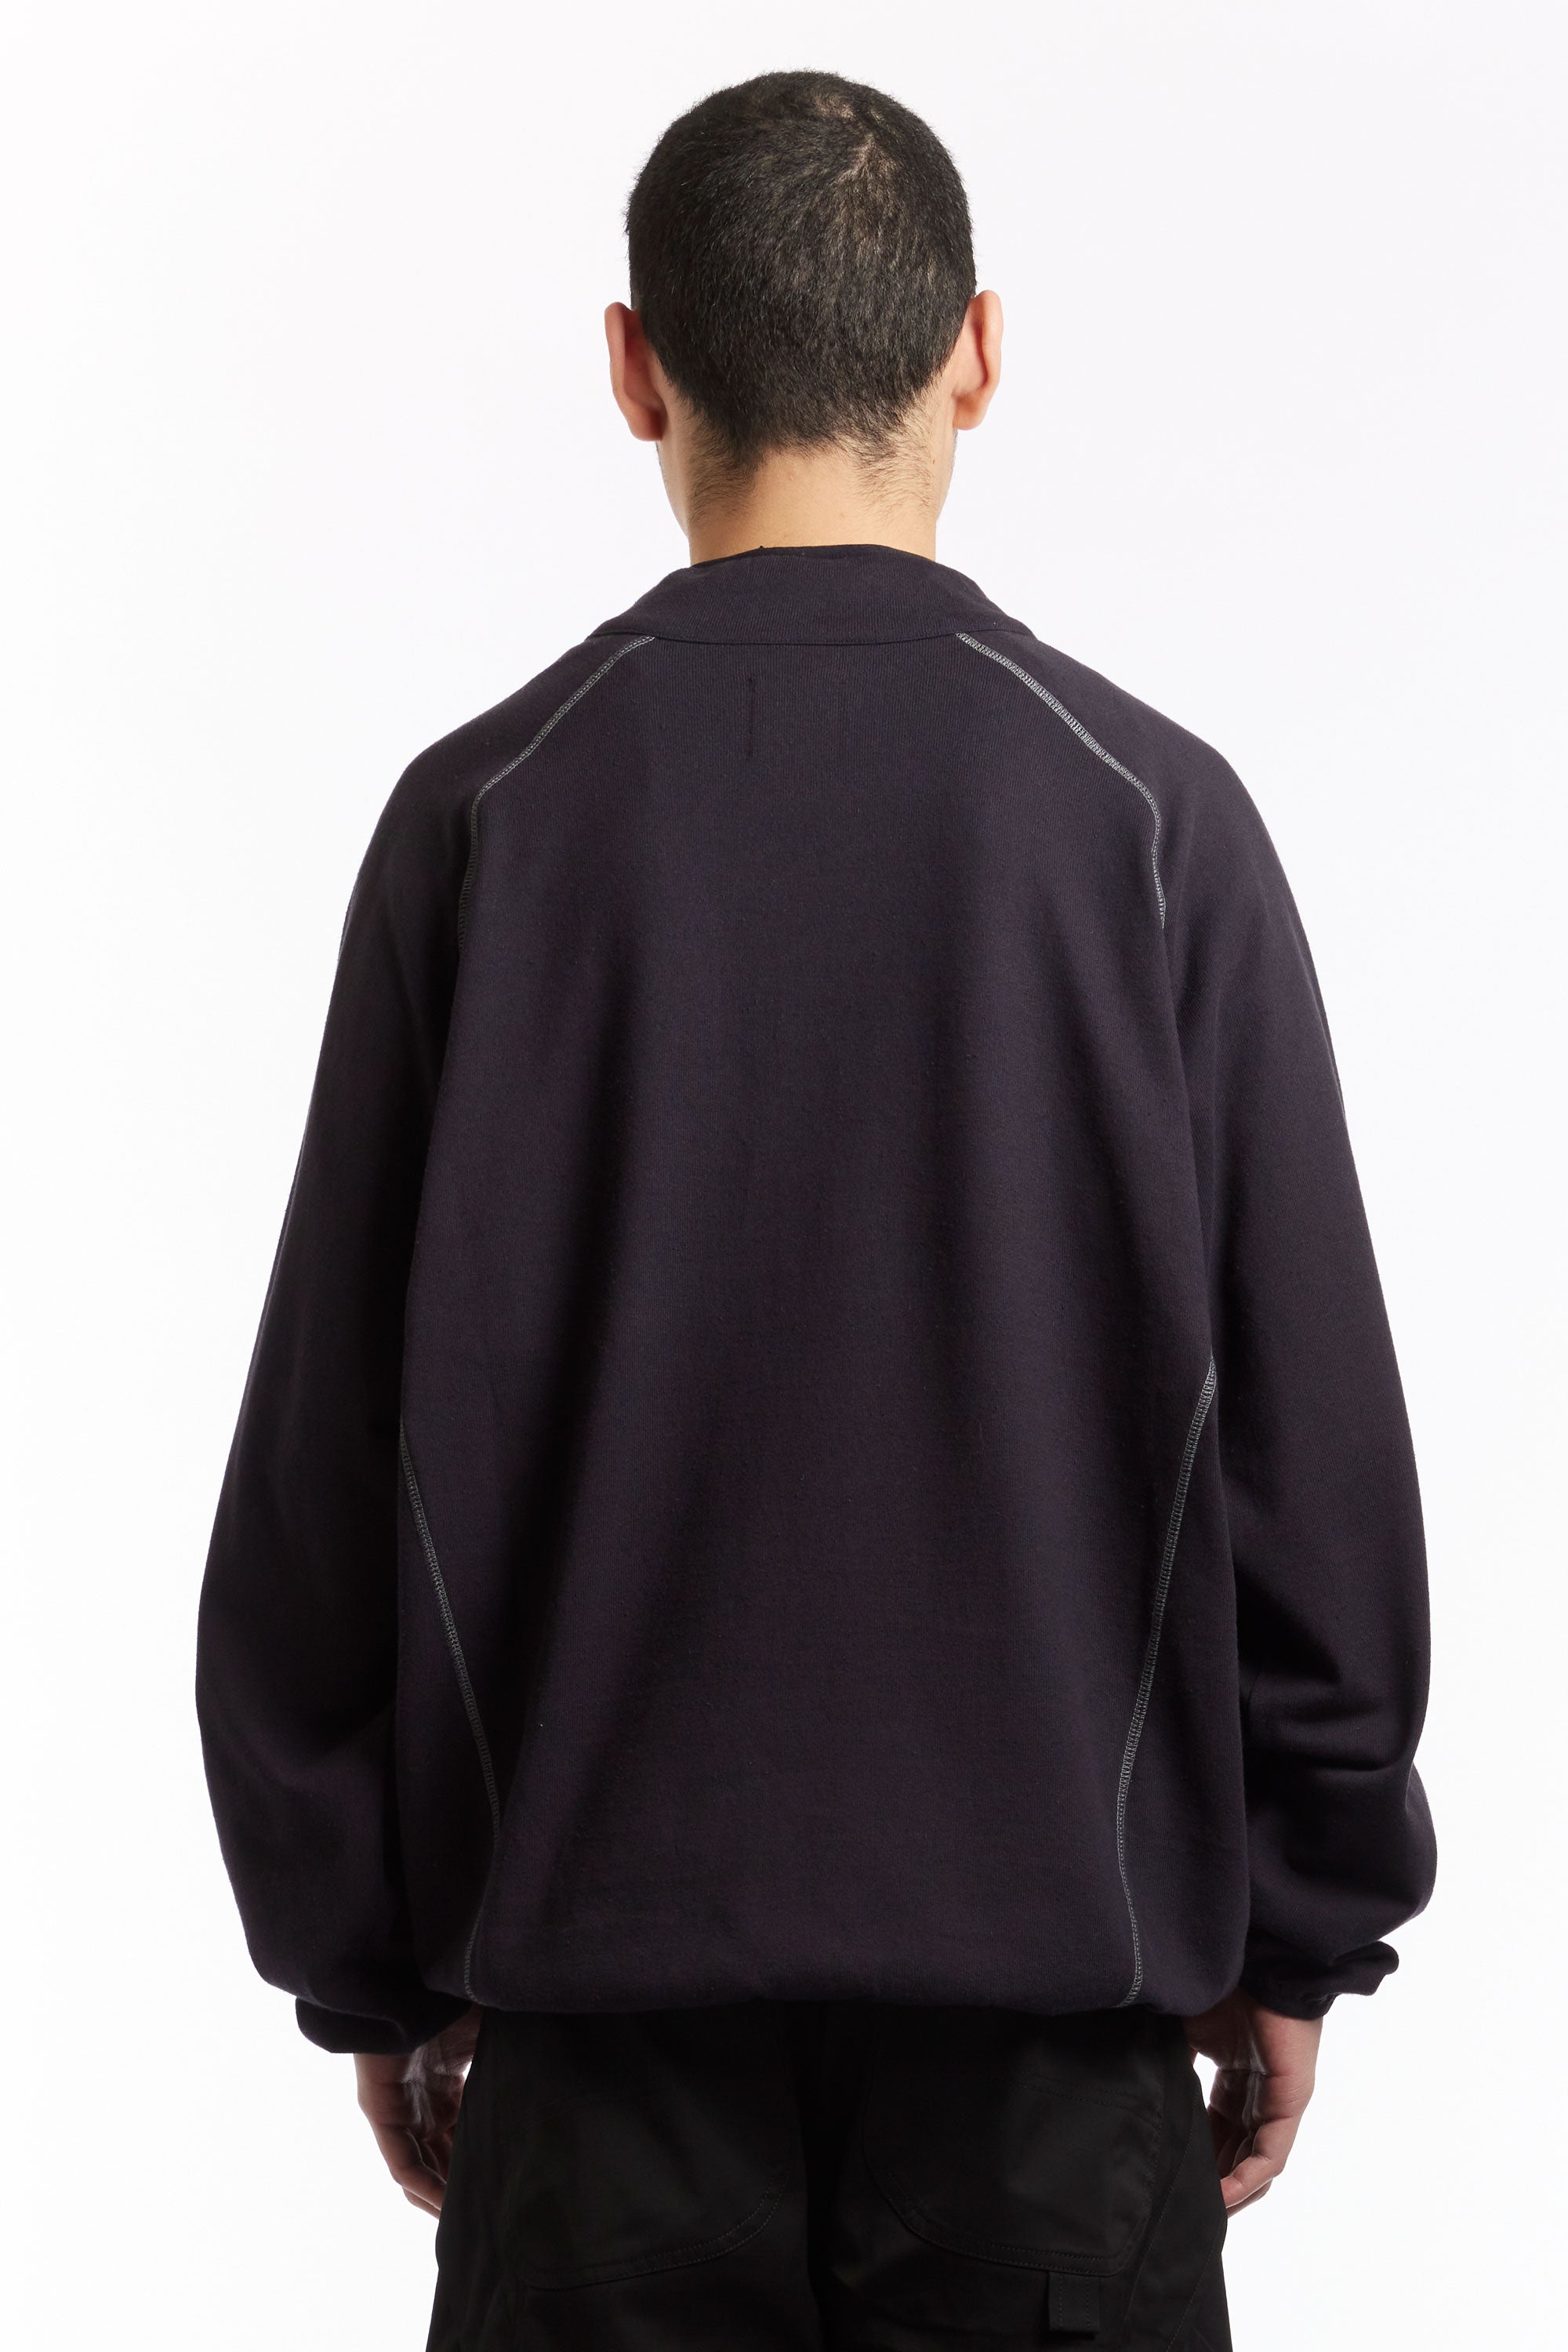 The ROA - JERSEY HALF ZIP  available online with global shipping, and in PAM Stores Melbourne and Sydney.